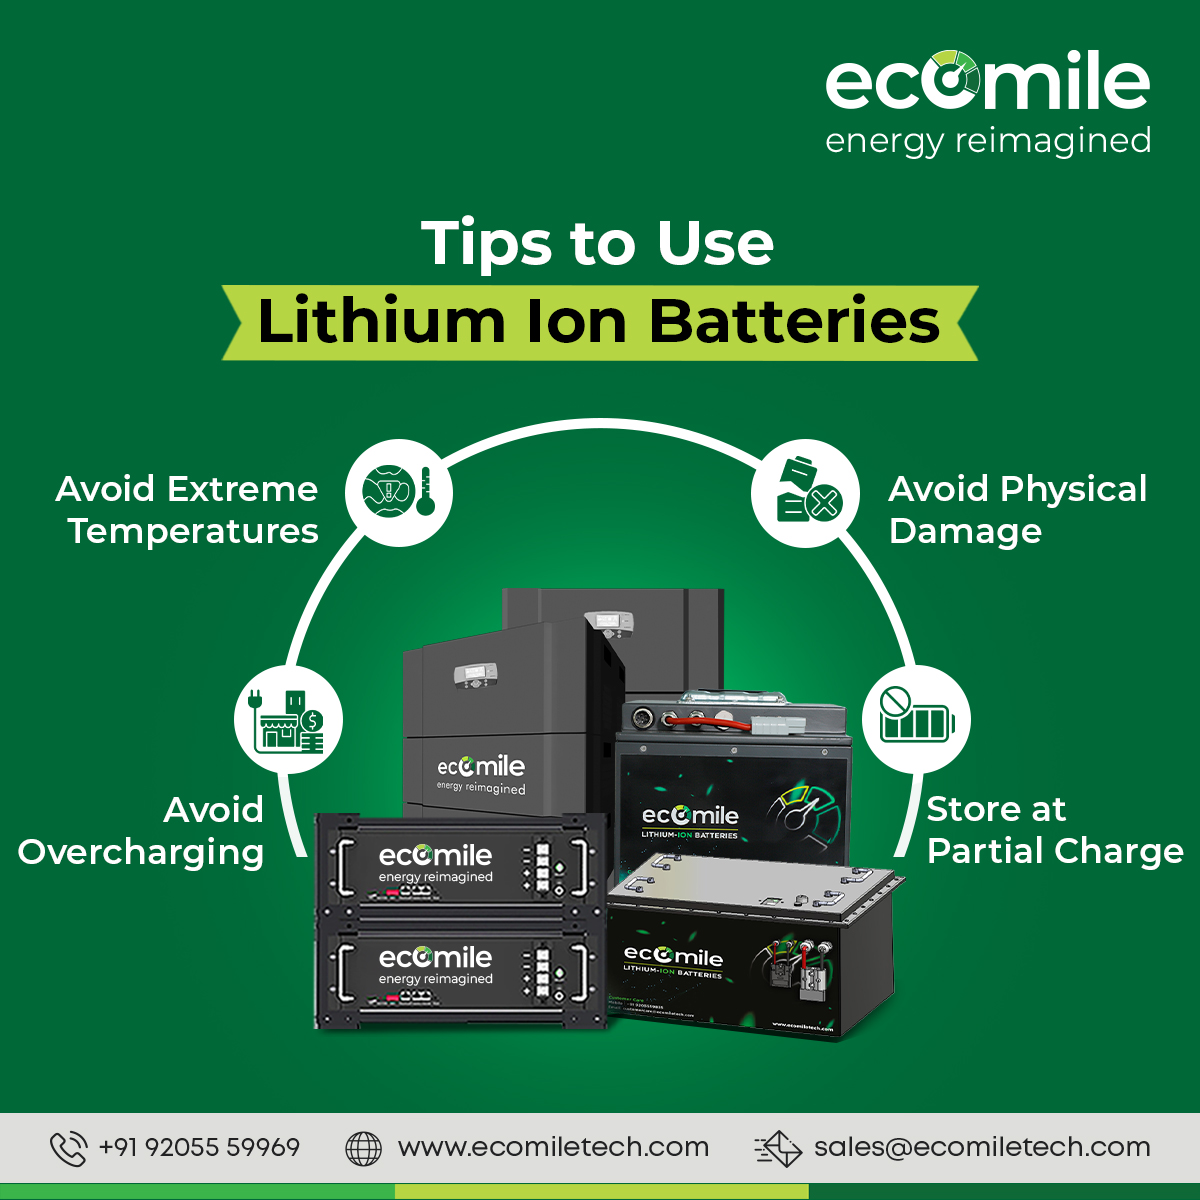 Dive into the world of lithium-ion batteries and learn how to maximize their performance!

#Ecomile #BatteryHacks #LithiumPower #EnergySavings #TechAdvice #PowerManagement #DeviceCare #ChargeResponsibly #Sustainability #CleanEnergy #SmartCharging #RenewableEnergy